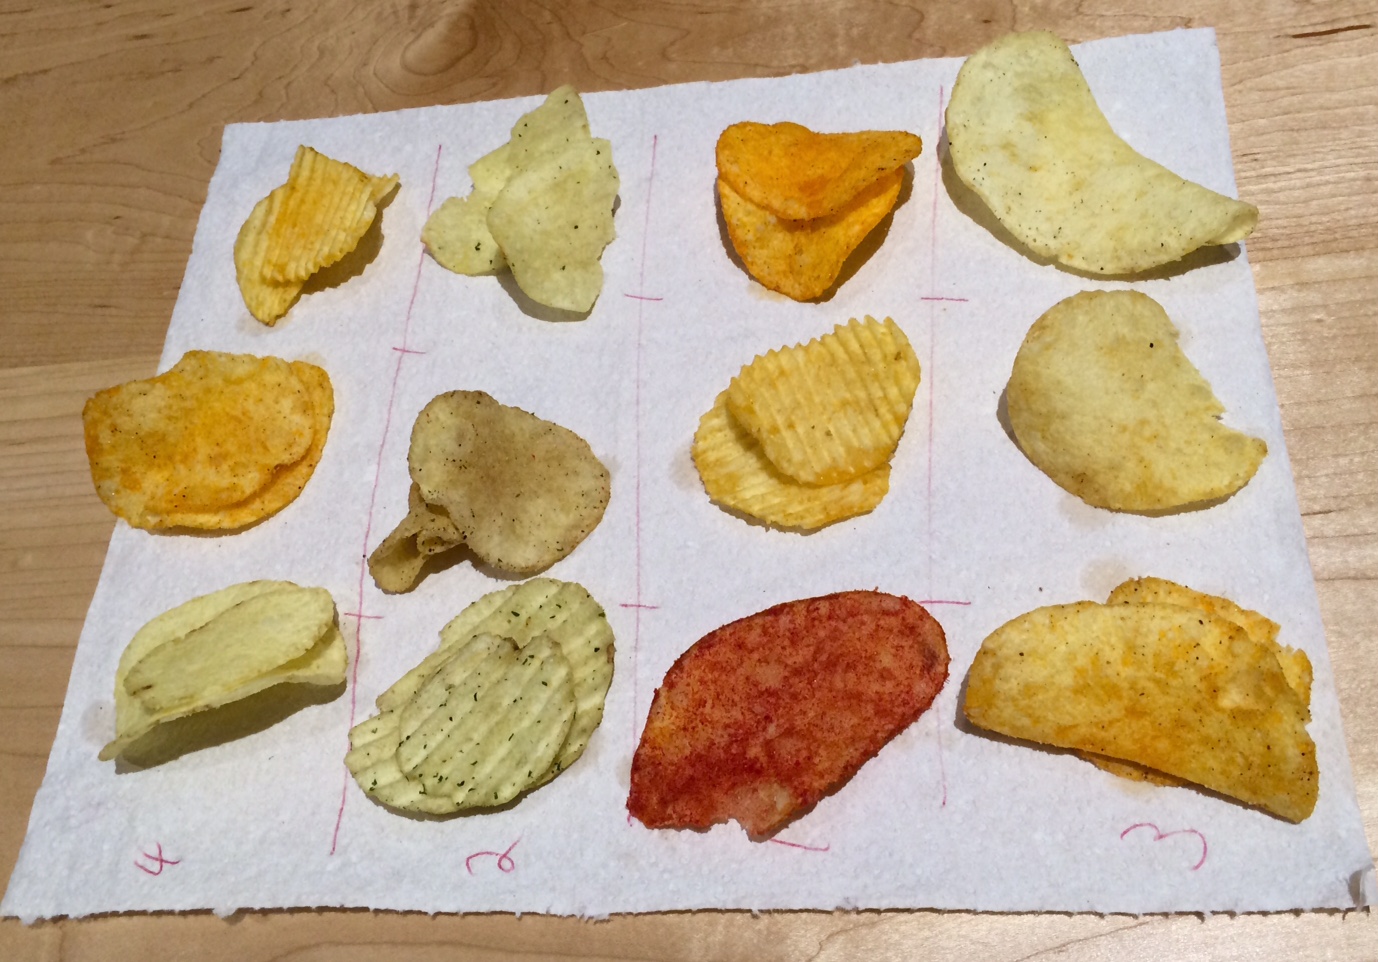  Canadian Lays Ketchup Flavour Chips [1 Large Family